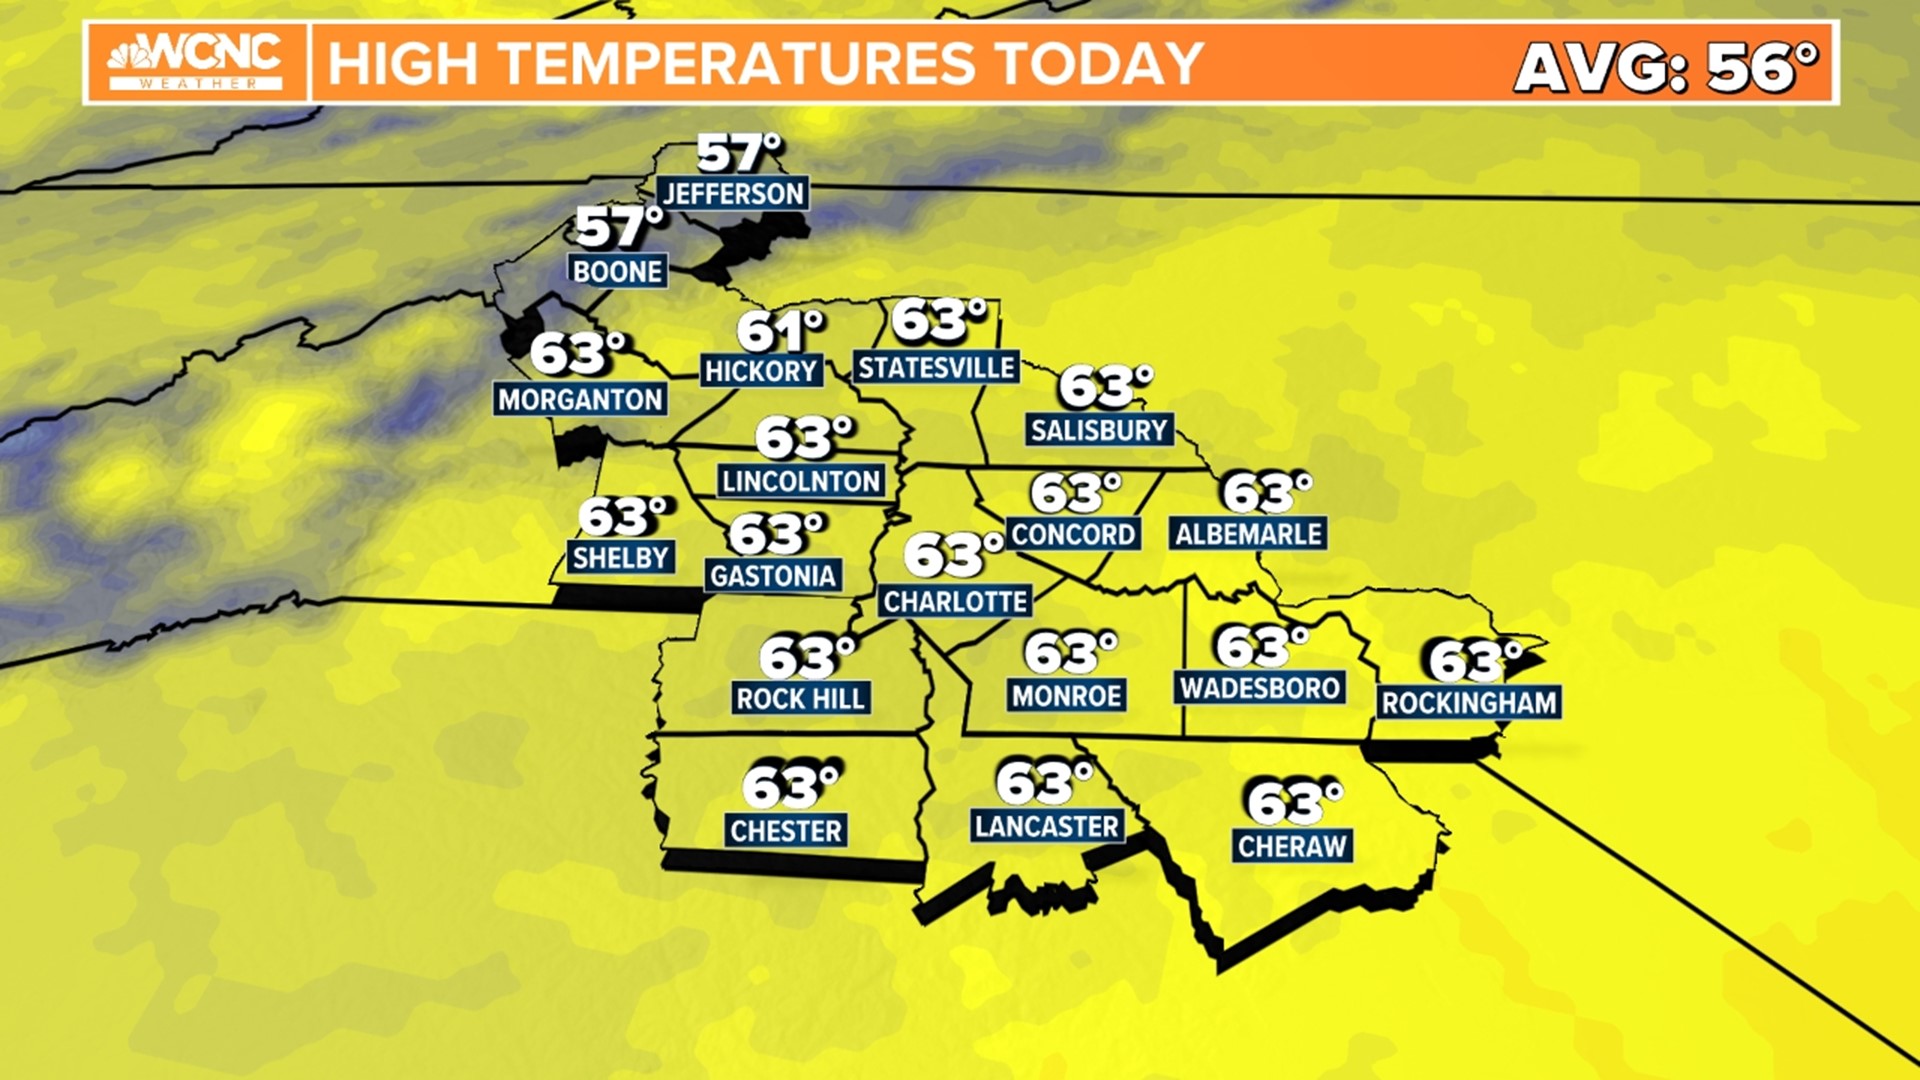 Mainly Sunny & Milder Today, Forecast